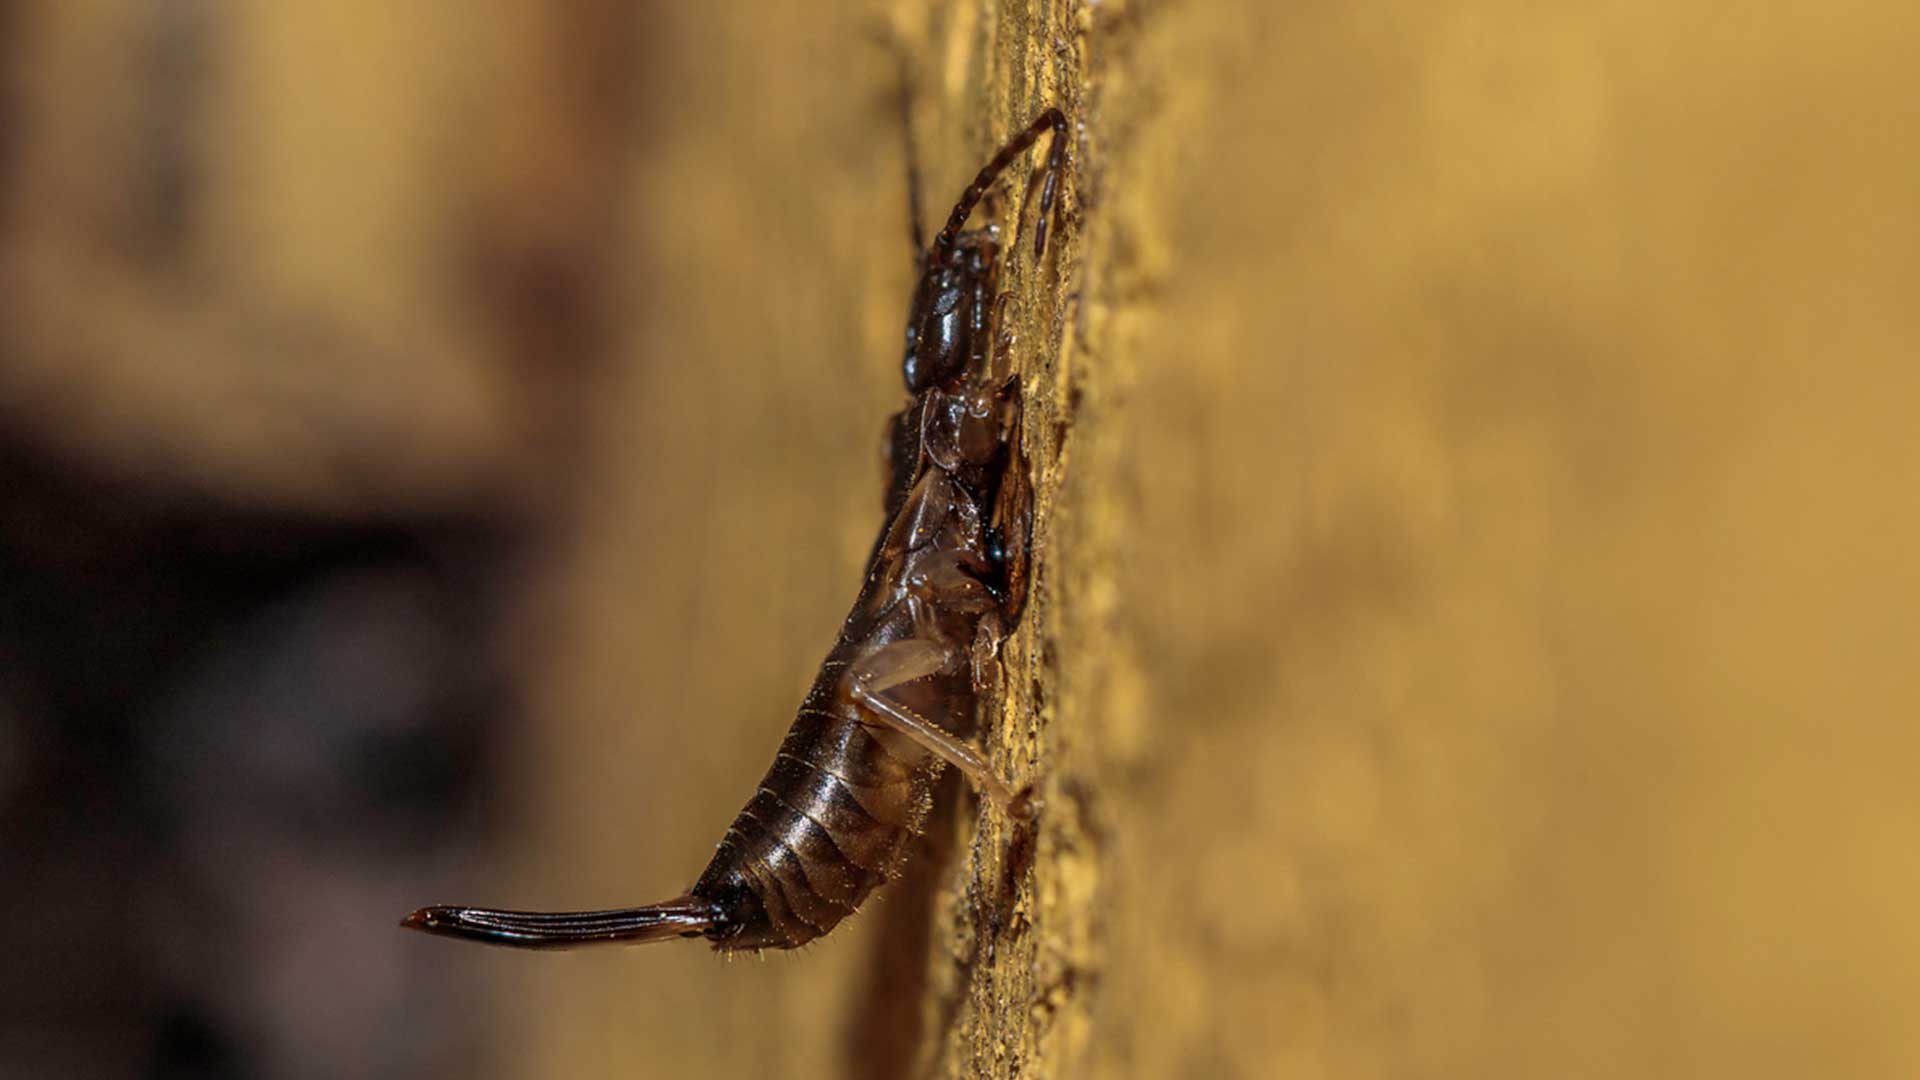 Young earwig on wooden fencing outside